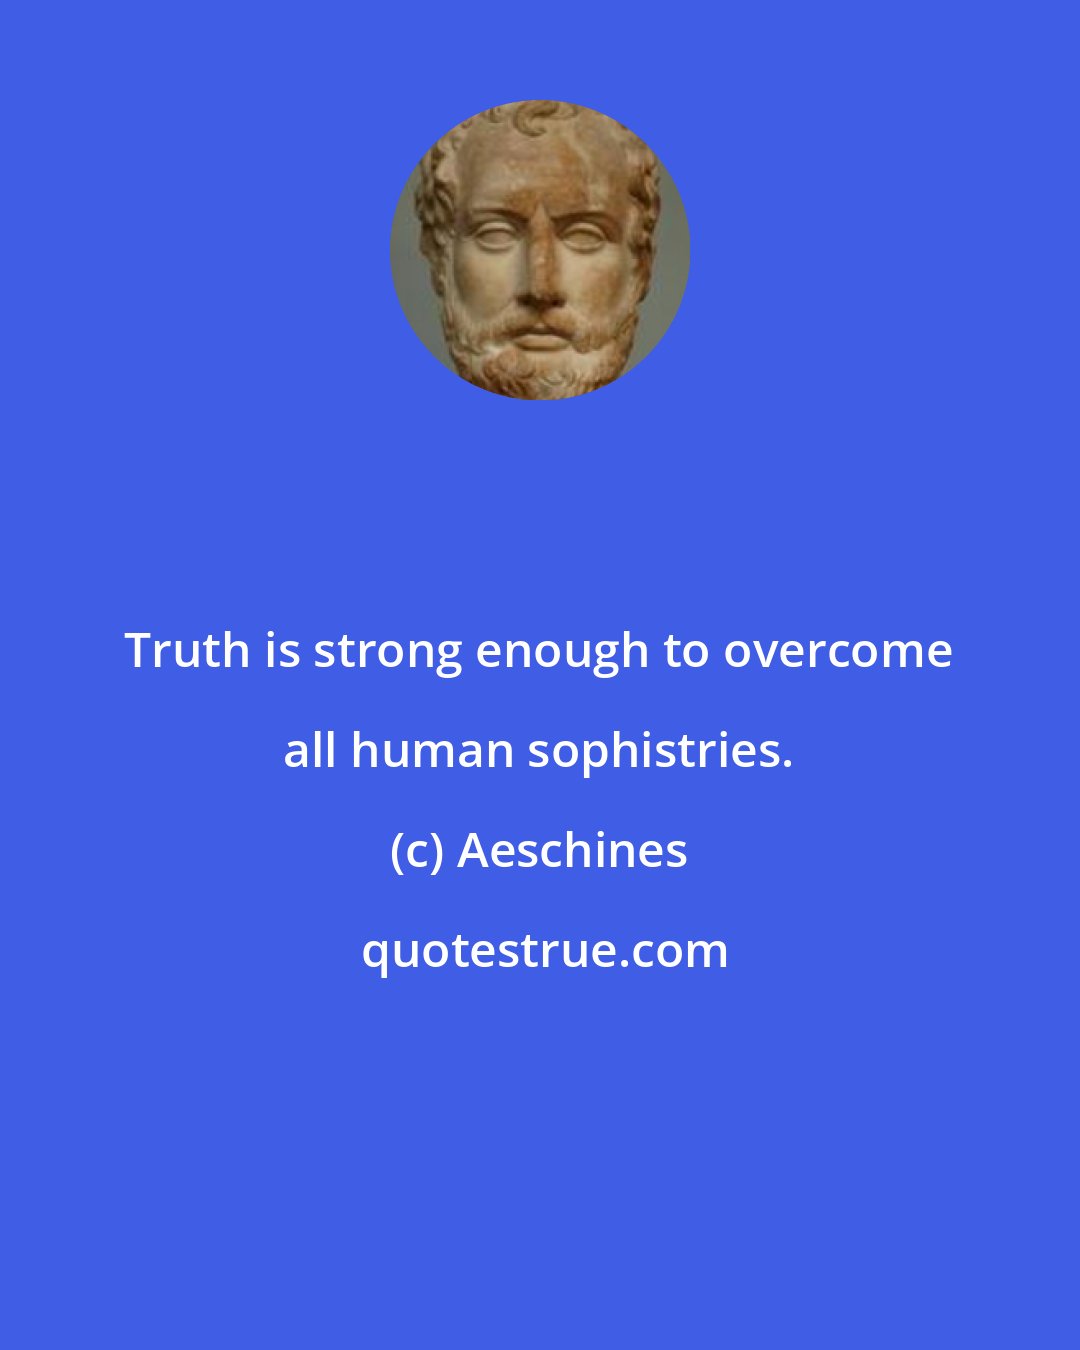 Aeschines: Truth is strong enough to overcome all human sophistries.